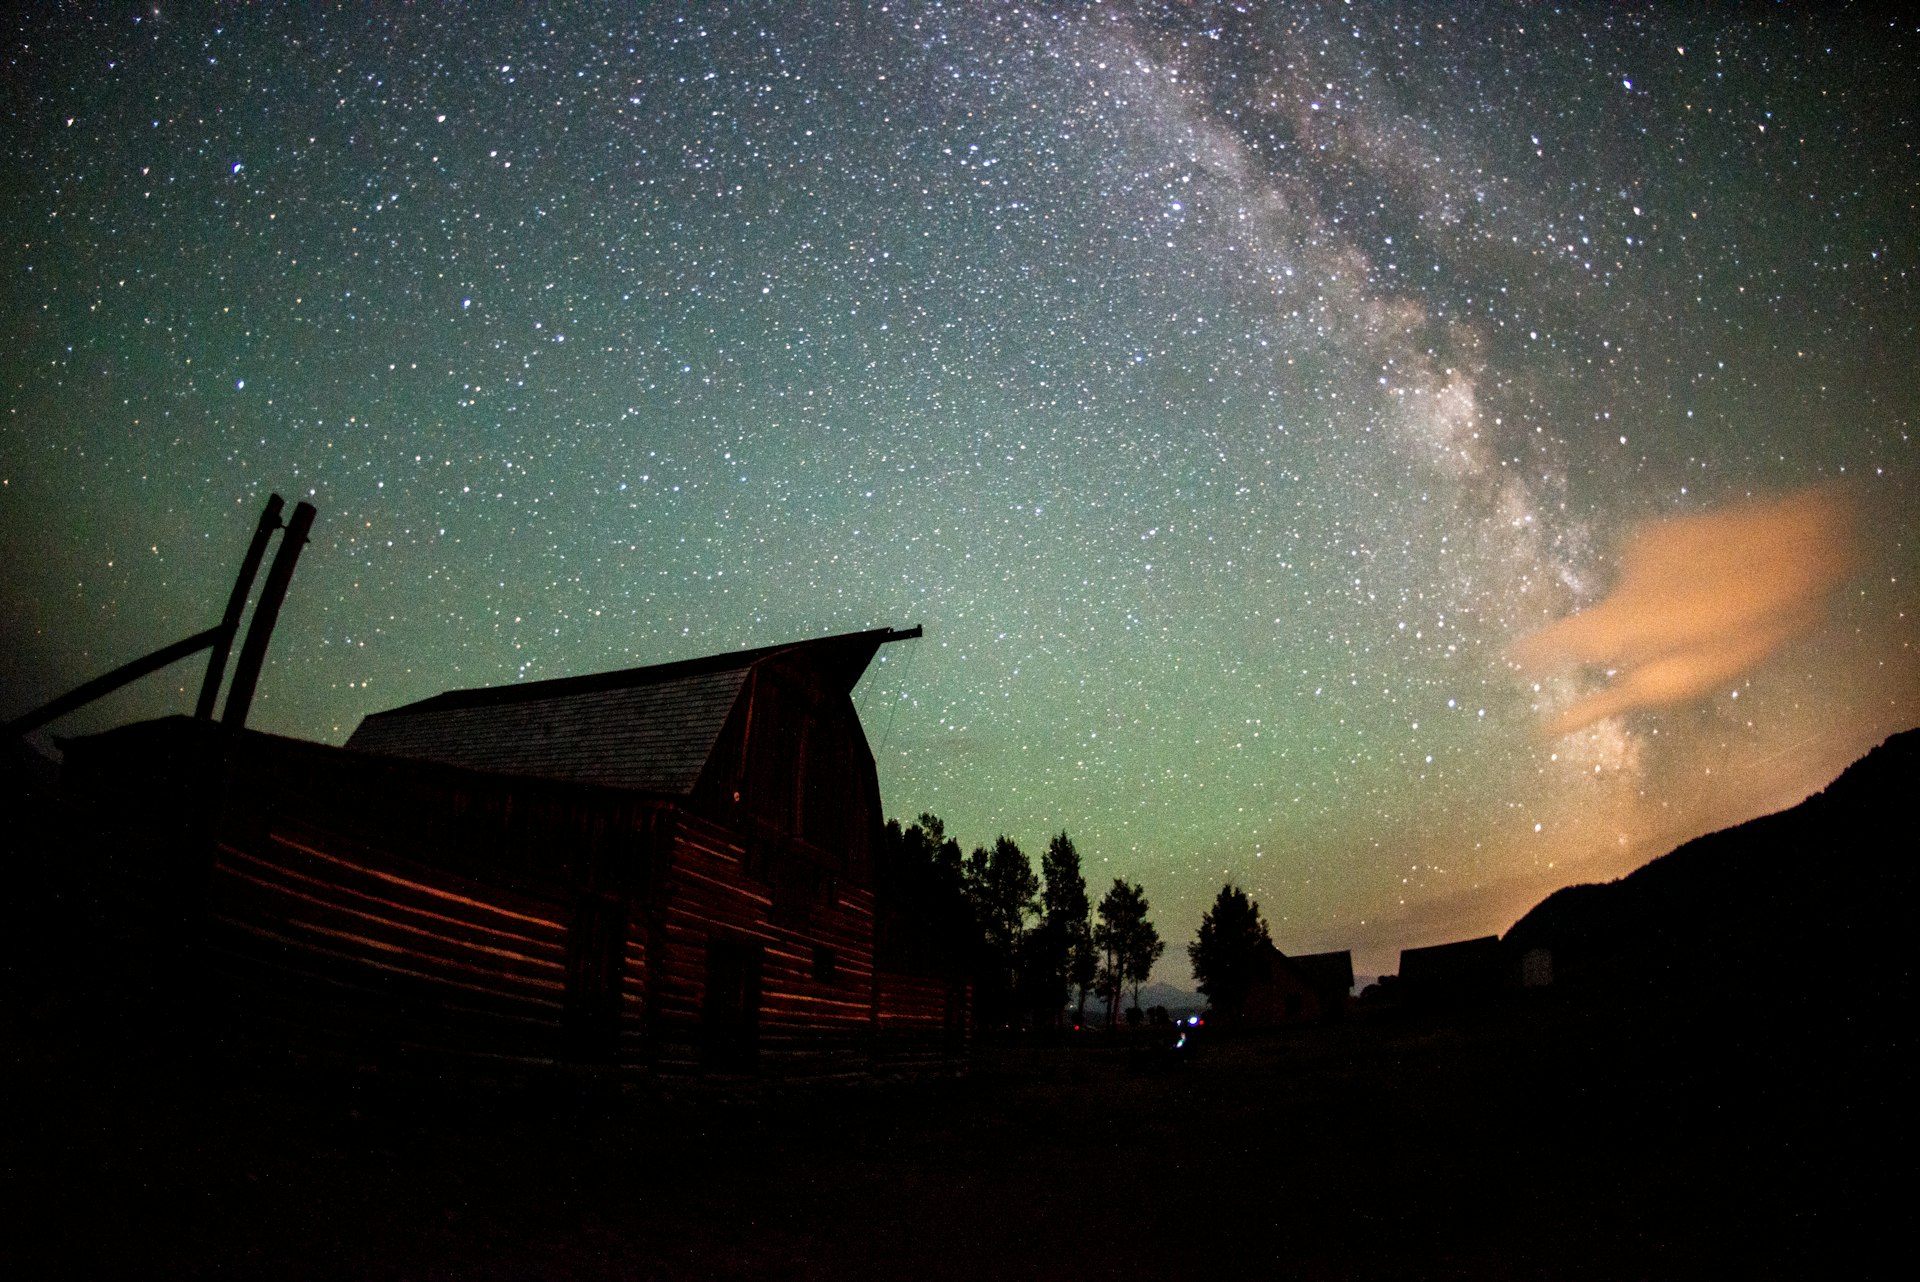 Celestial skies filled with stars seen over T.A Moulton Barn, Grand Tetons National Park